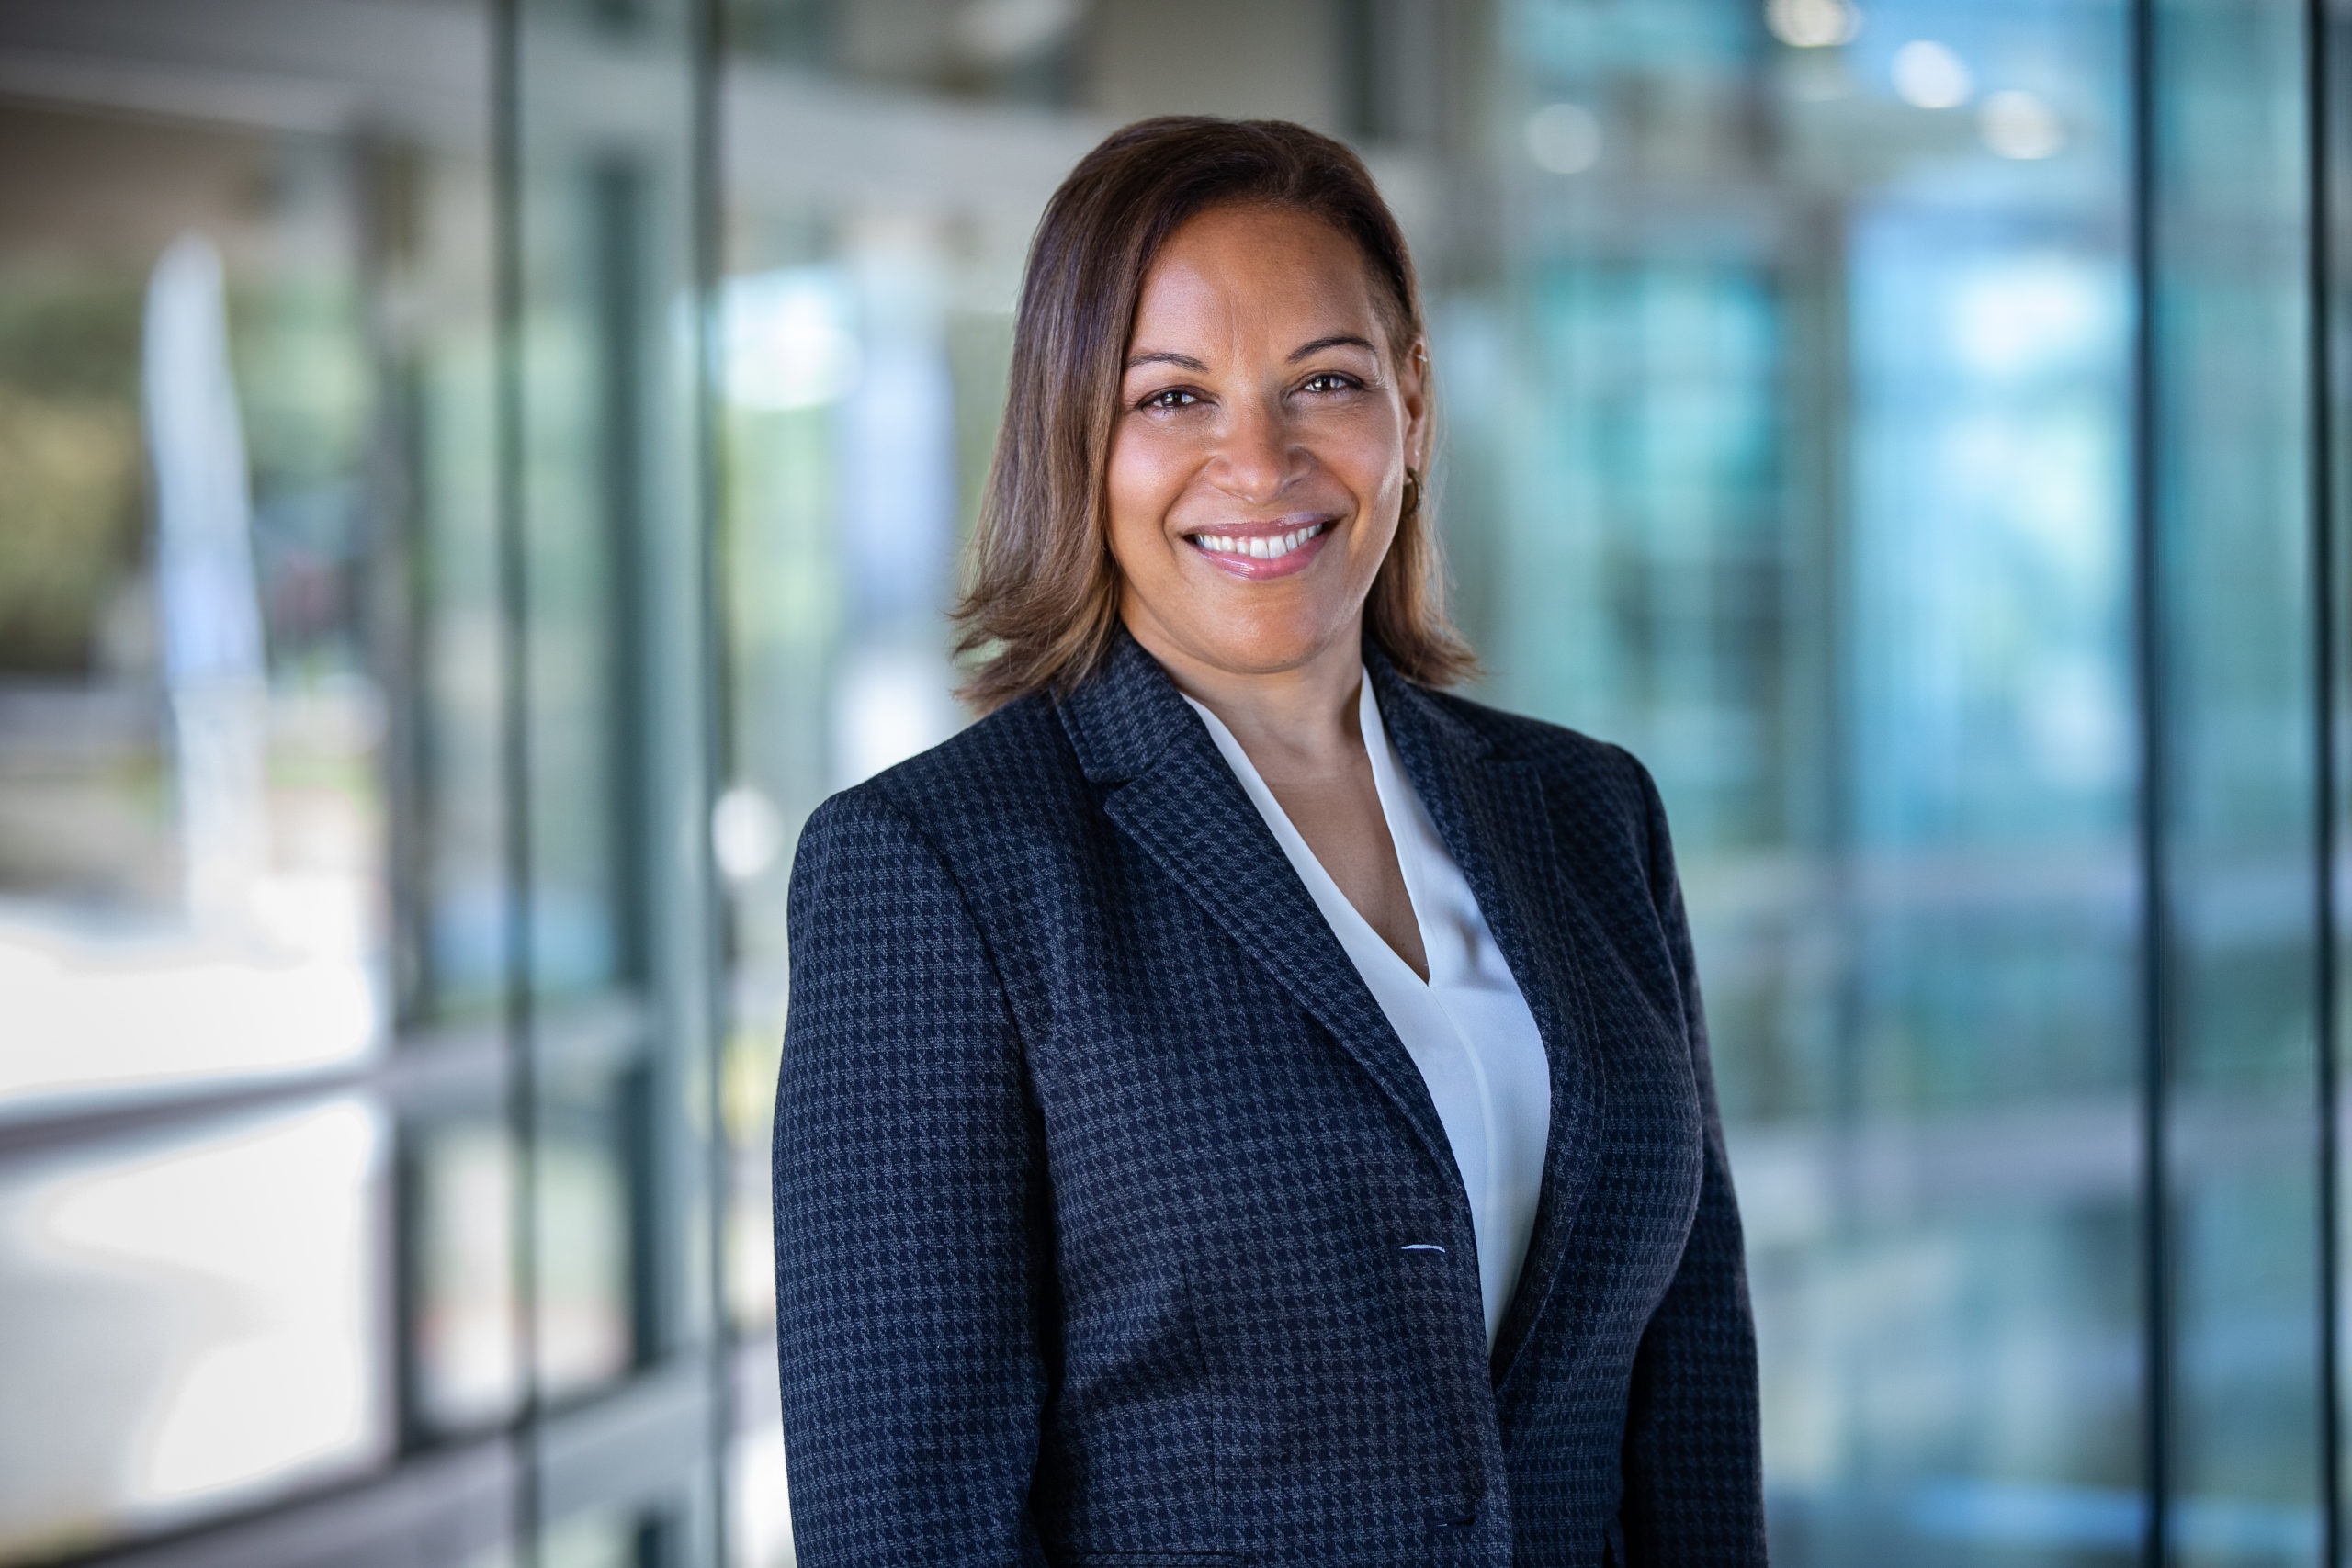 Cynthia Burks joins Torch's Board of Directors